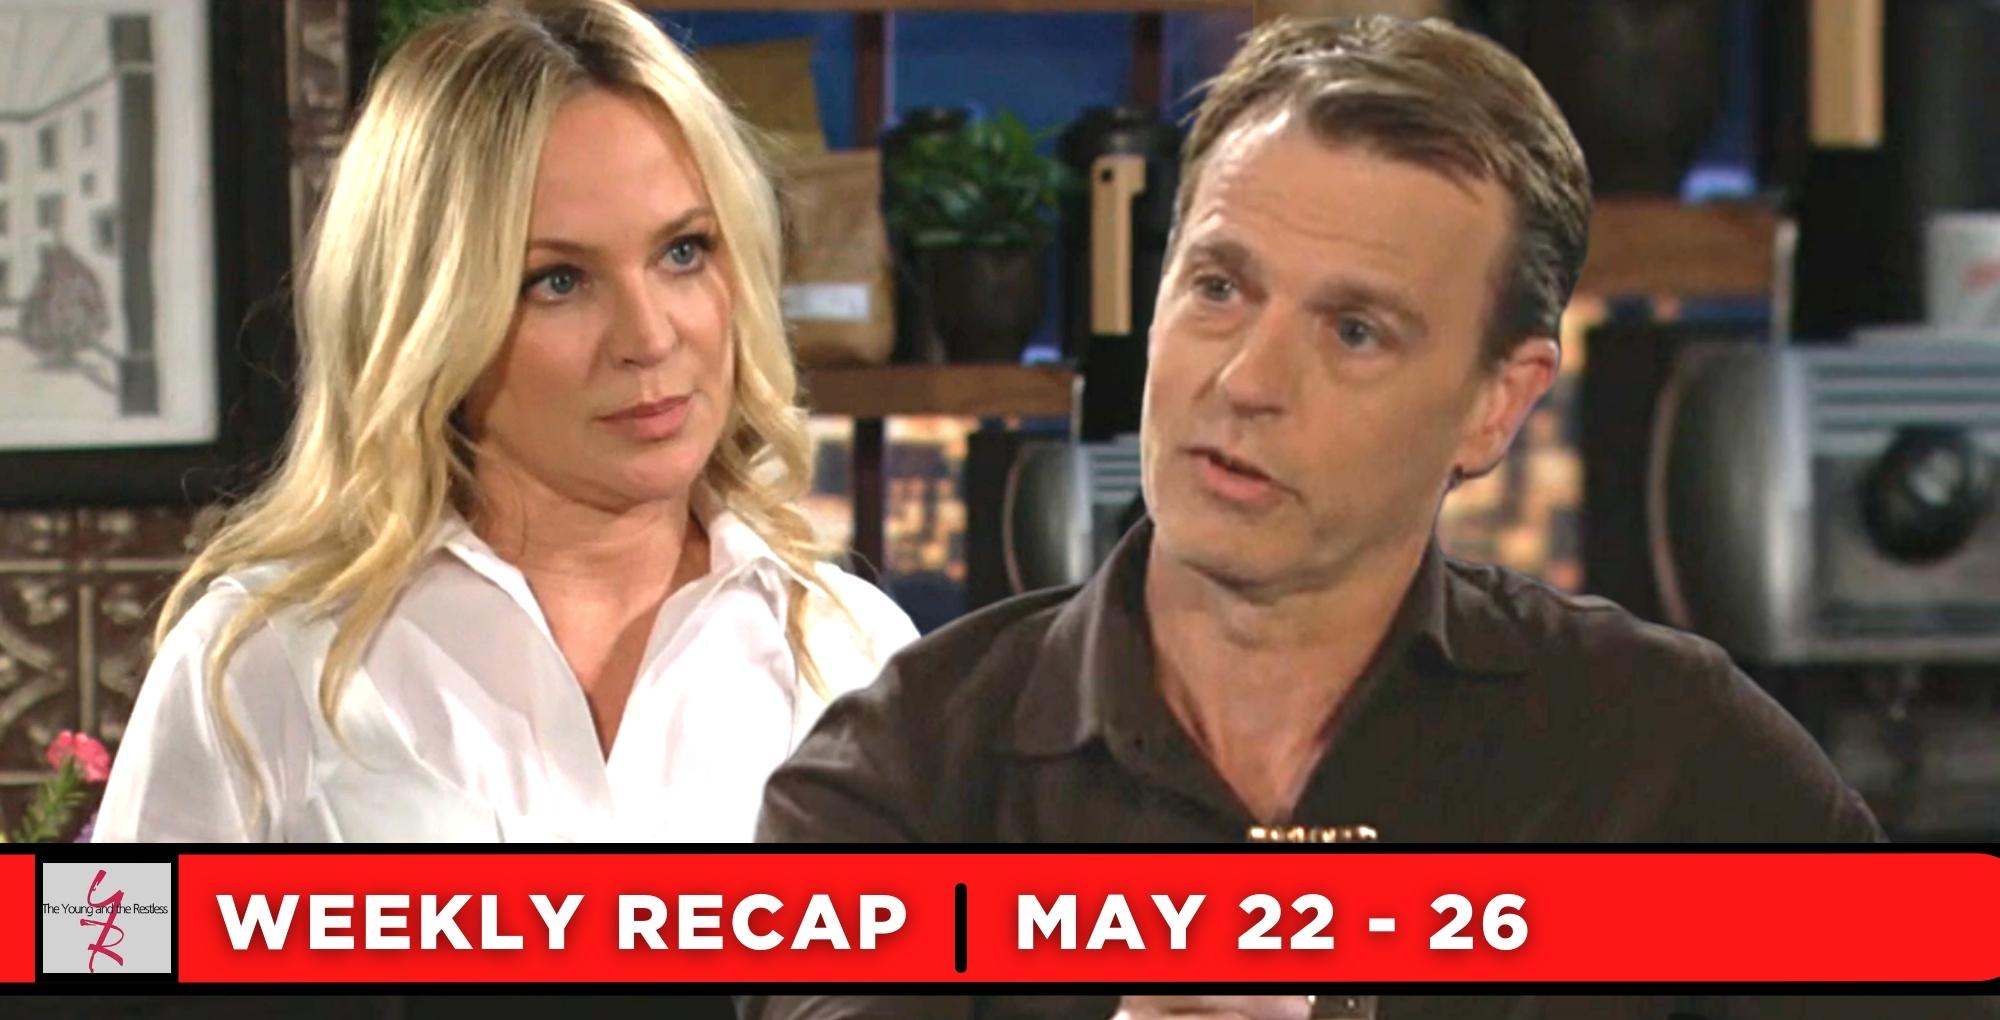 The Young and the Restless Recaps: Fury, Feuds & Clues